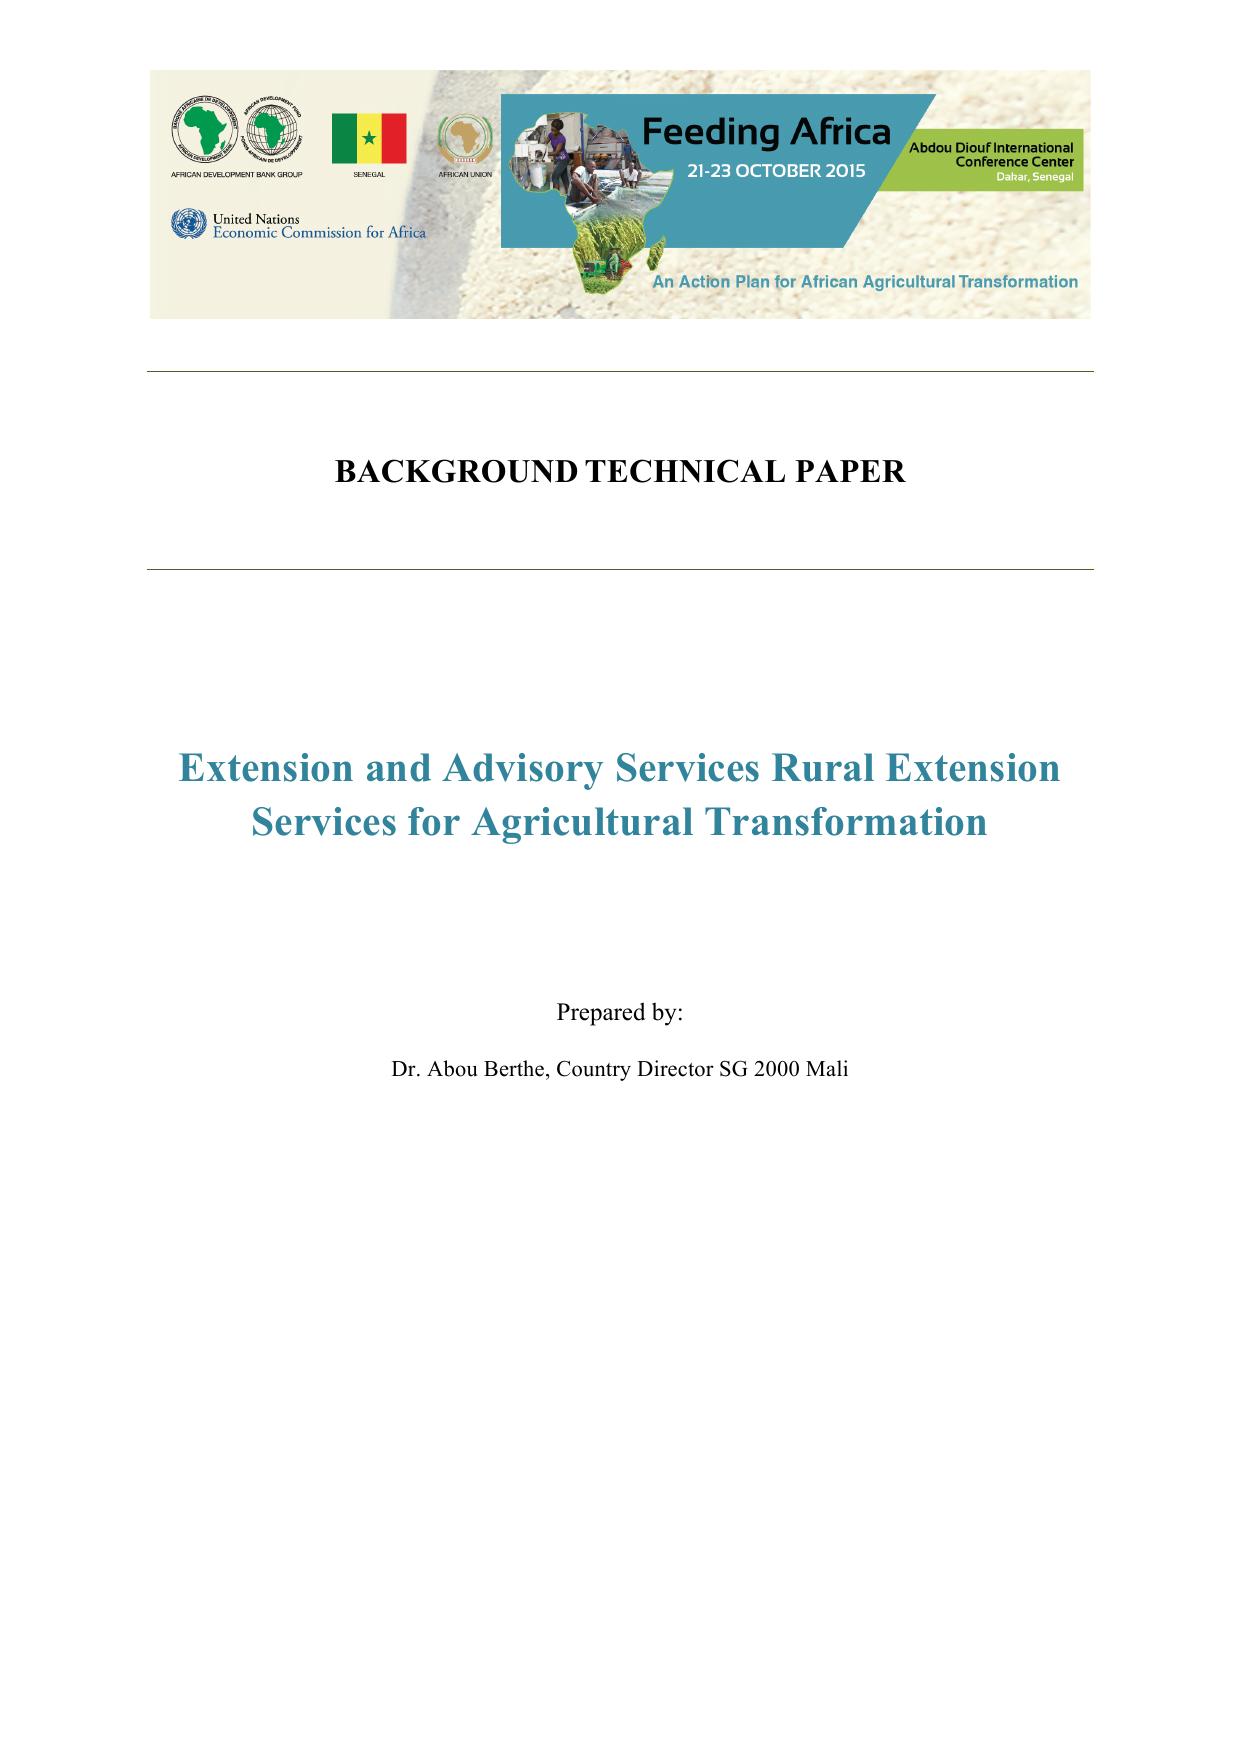 Extension and Advisory Services Rural Extension Services for Agricultural Transformation